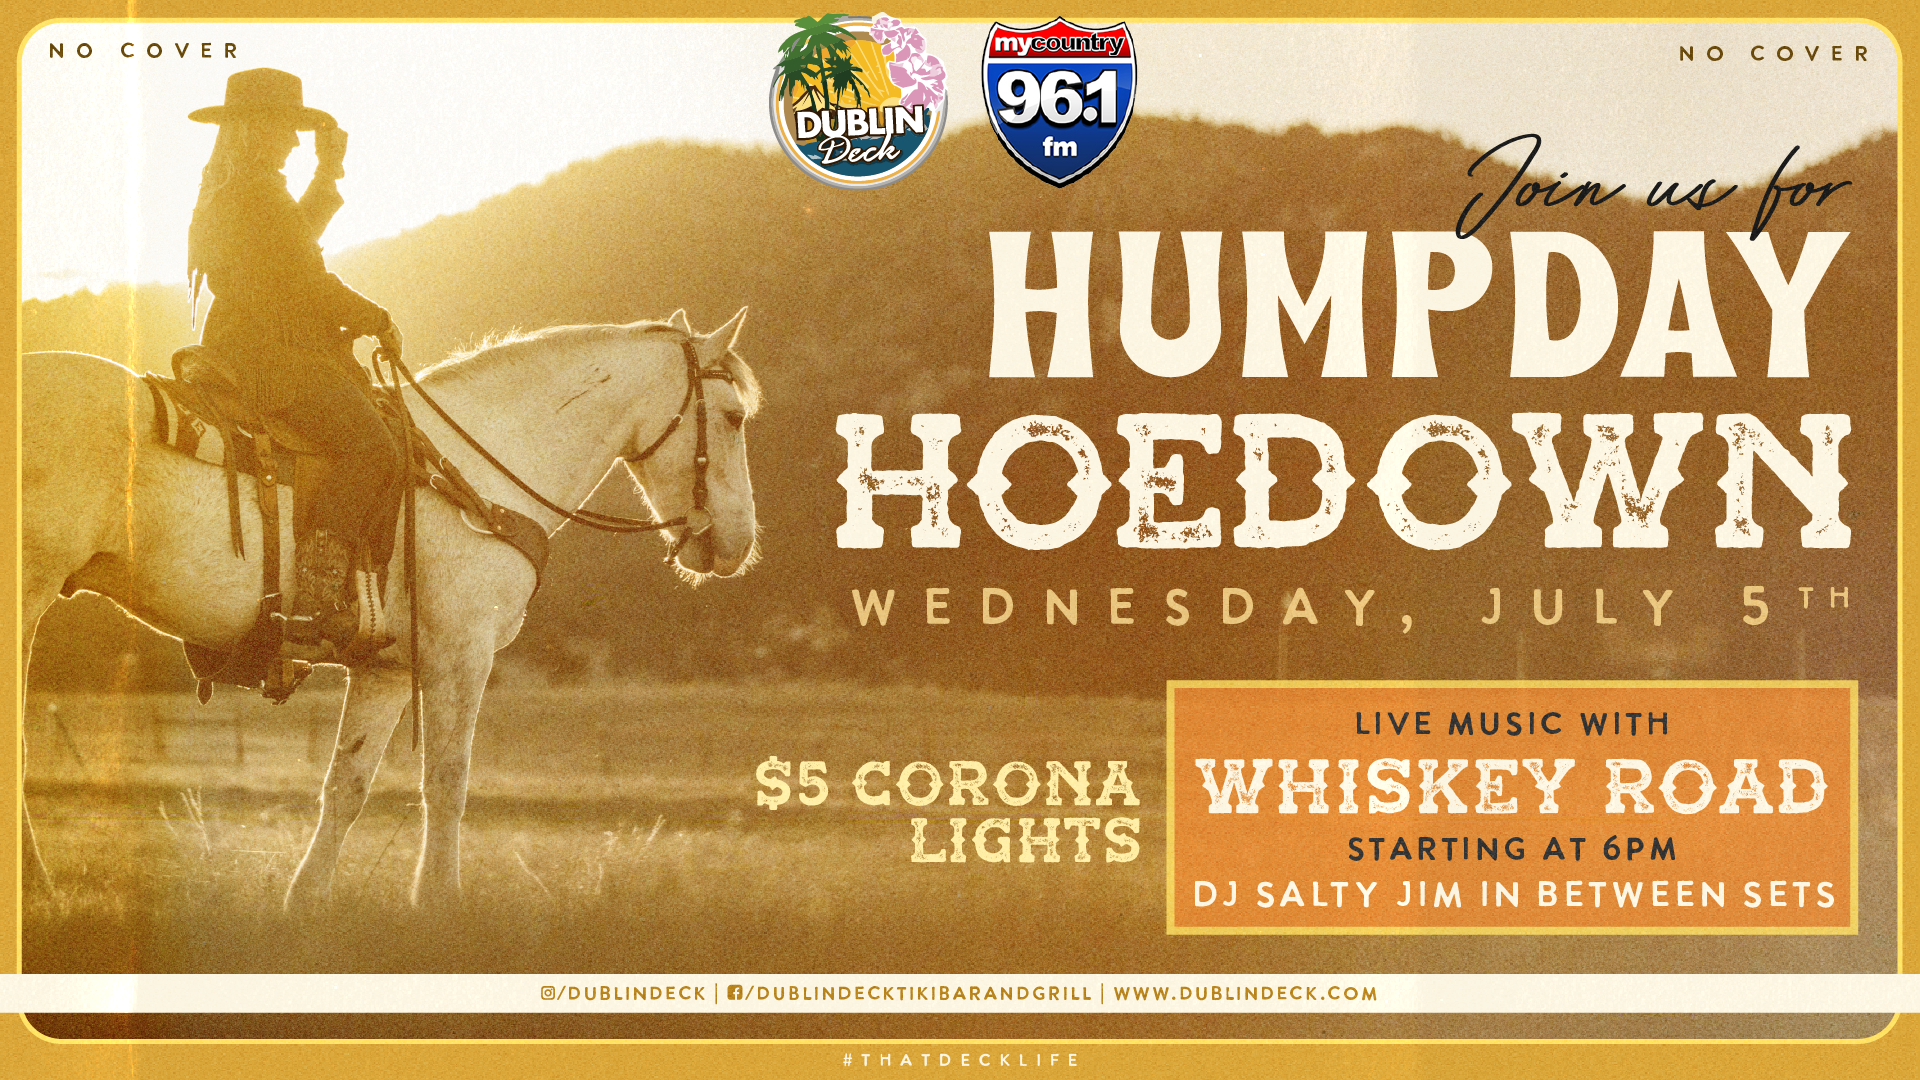 Saddle up for another Humpday Hoedown with Whiskey Road! Music begins at 6PM